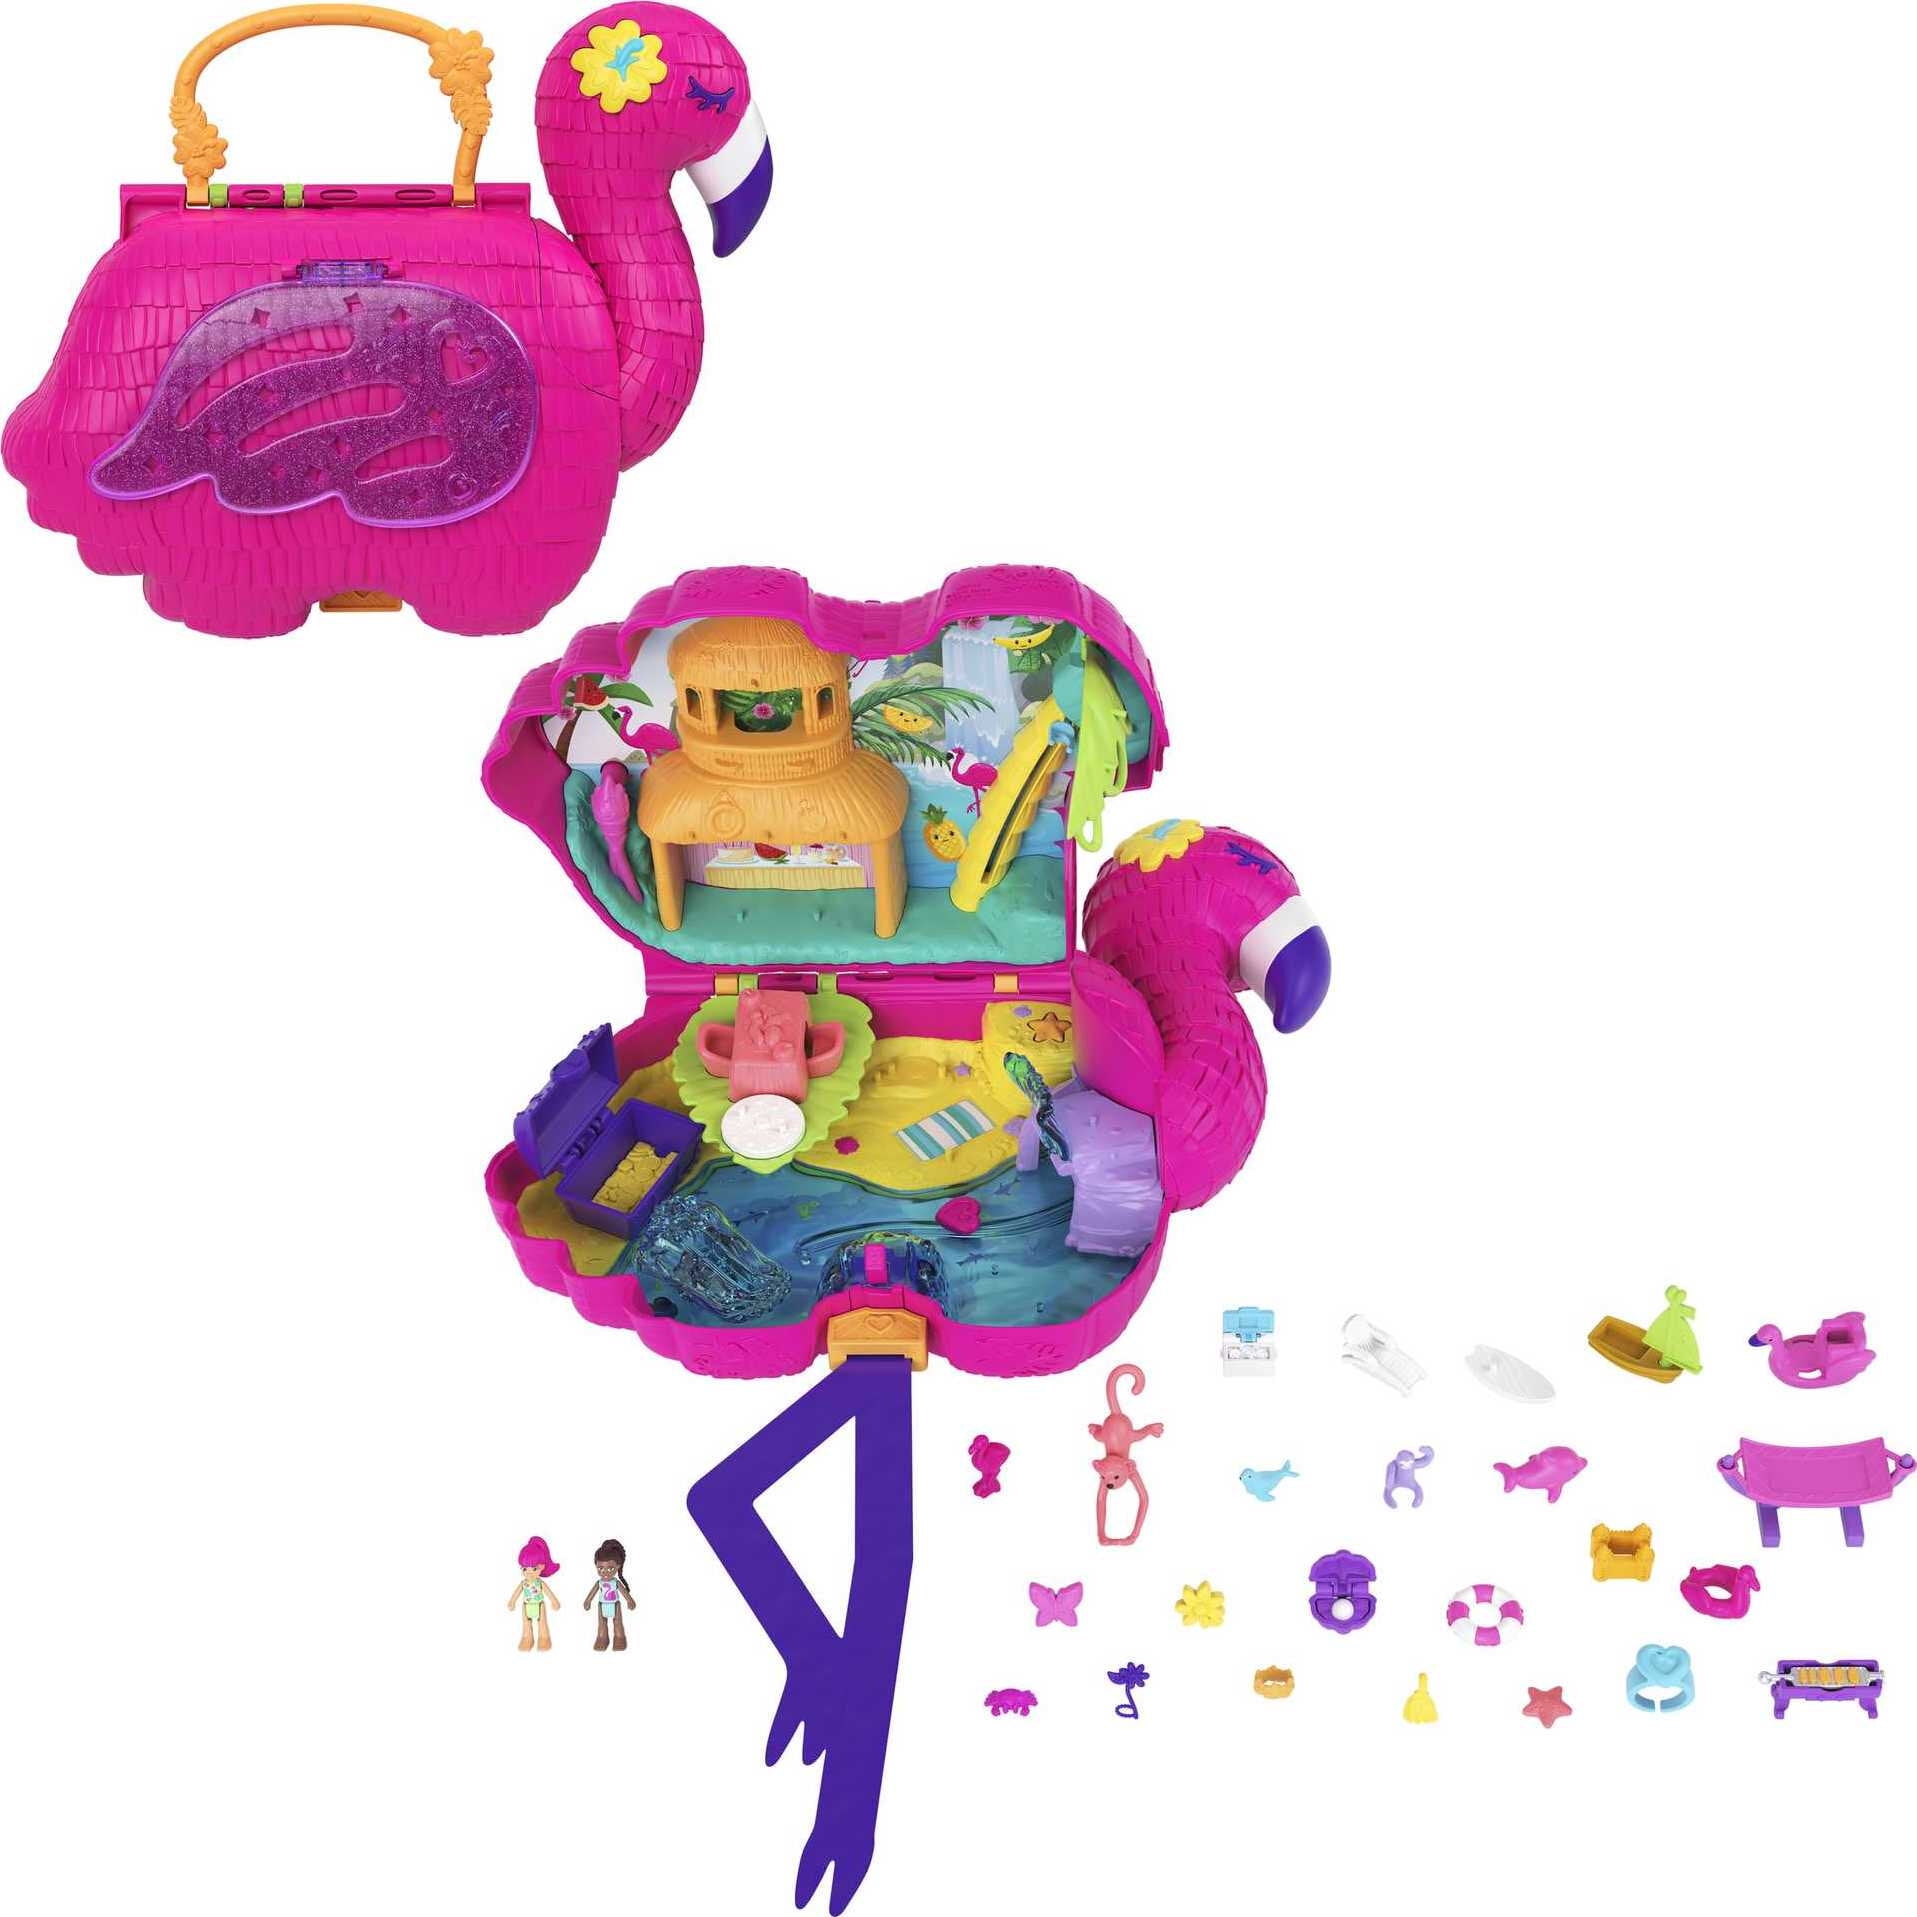 Polly Pocket Large Flamingo Party Compact, Animal Toy with 2 Micro Dolls & 26 Surprise Accessories